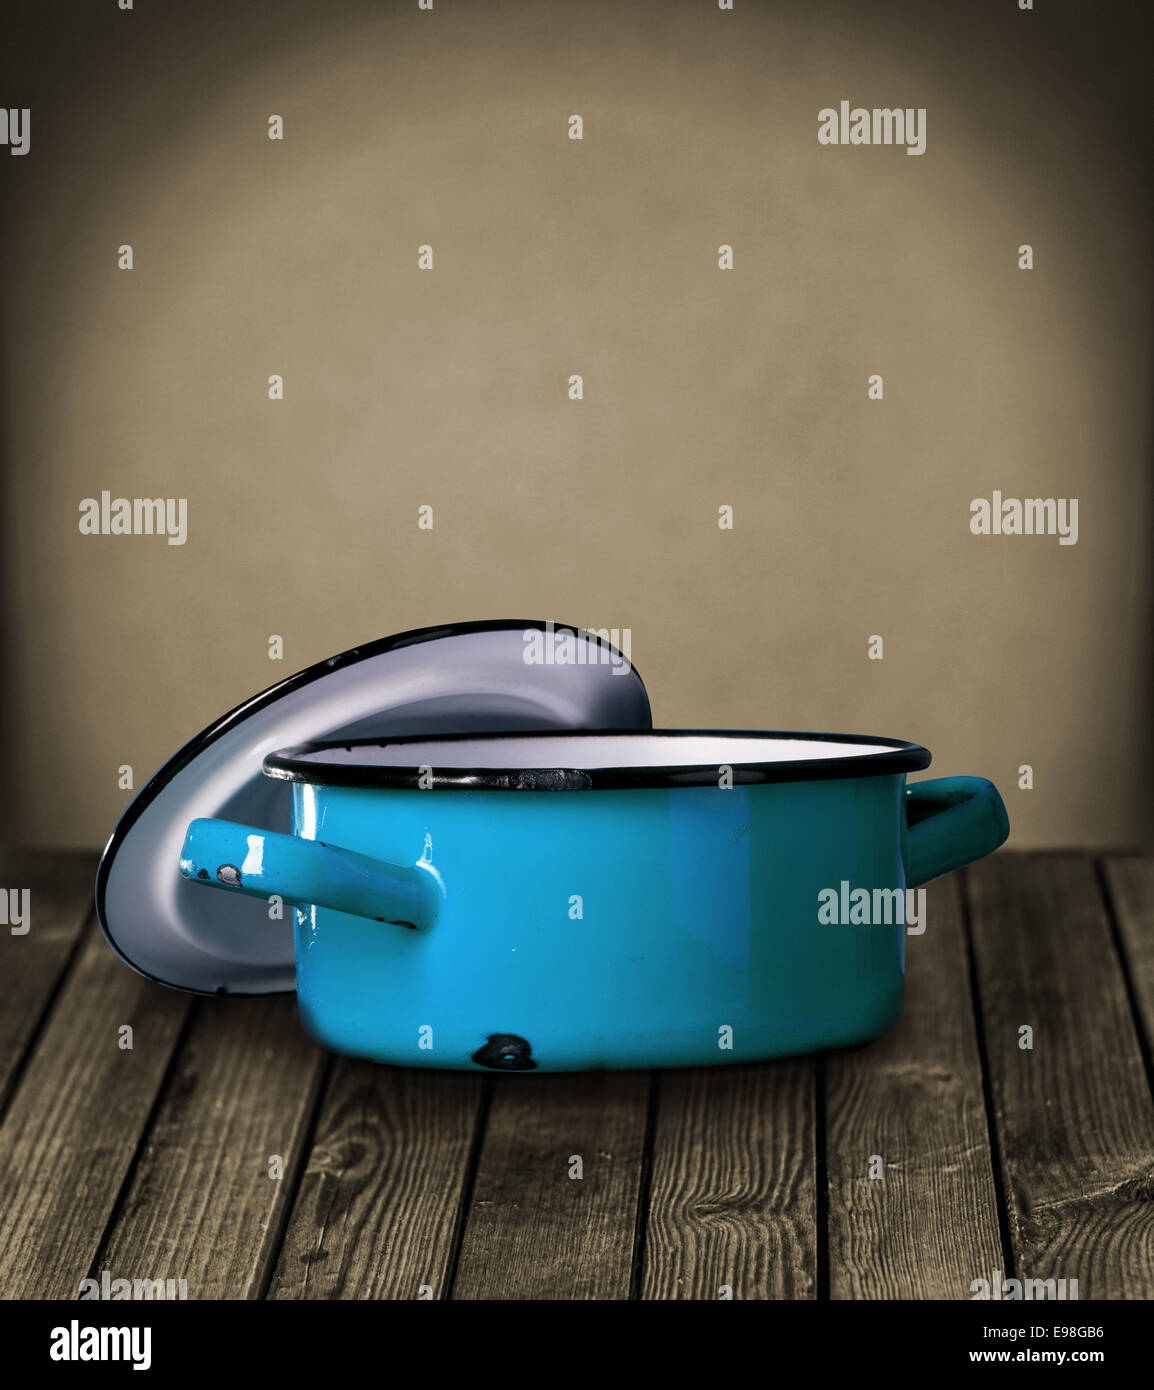 https://c8.alamy.com/comp/E98GB6/old-blue-enameled-pot-and-lid-standing-on-a-rustic-wooden-table-against-E98GB6.jpg